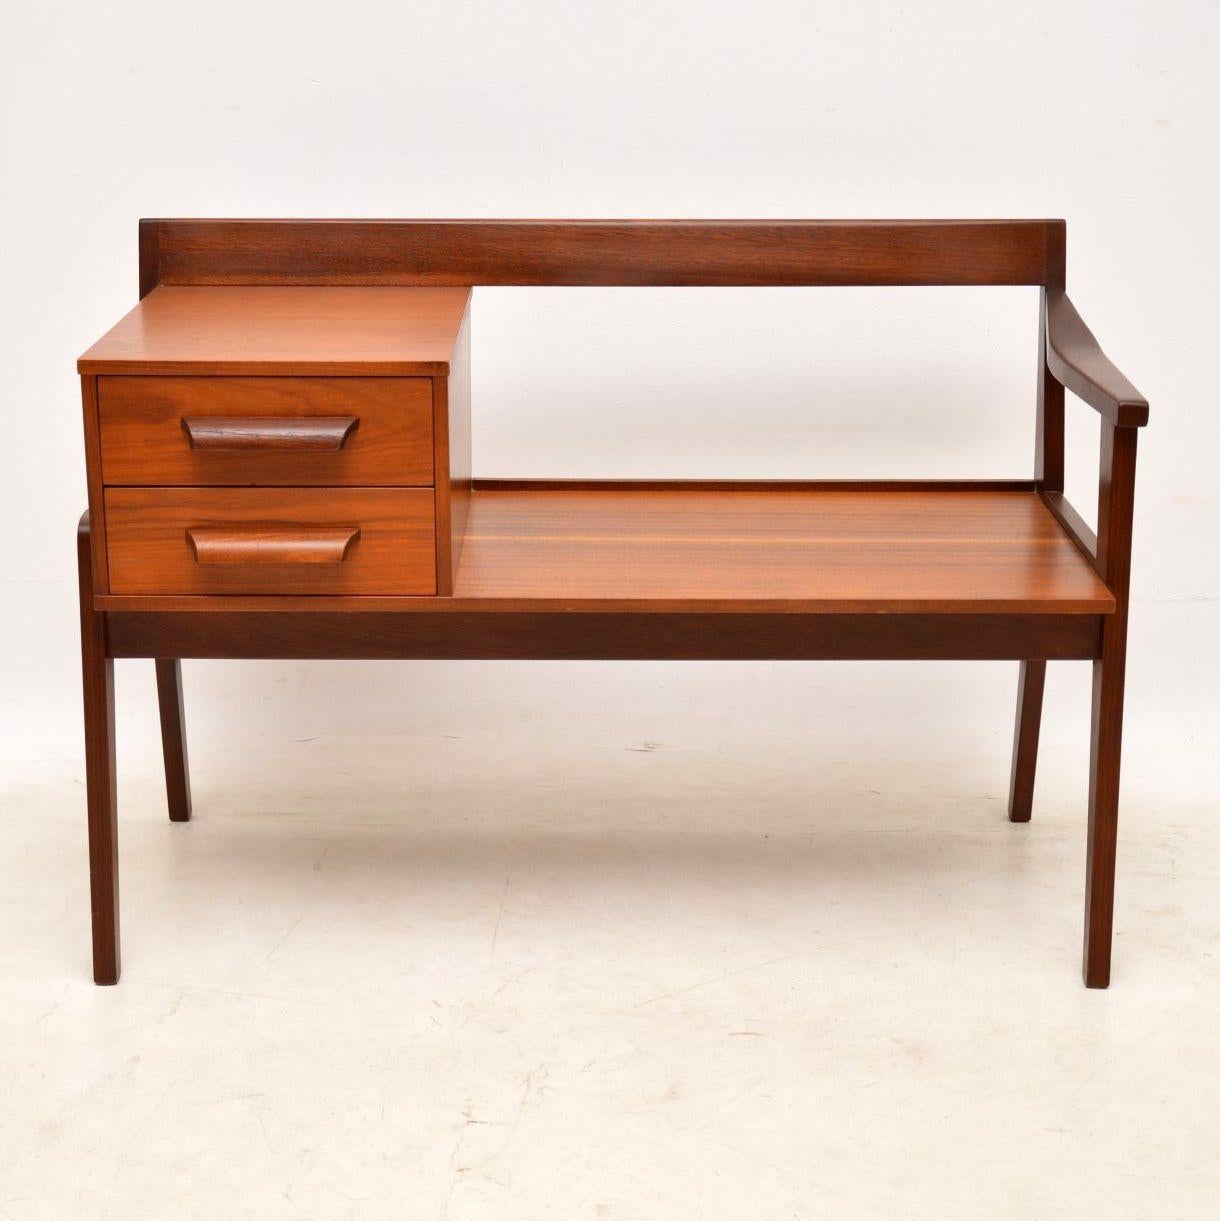 A beautifully designed vintage entry bench in teak, this dates from the 1960s and was made by Chippy Heath in England. It has a beautiful design and is in amazing condition for its age. It is clean, sturdy and sound with a lovely color and nice